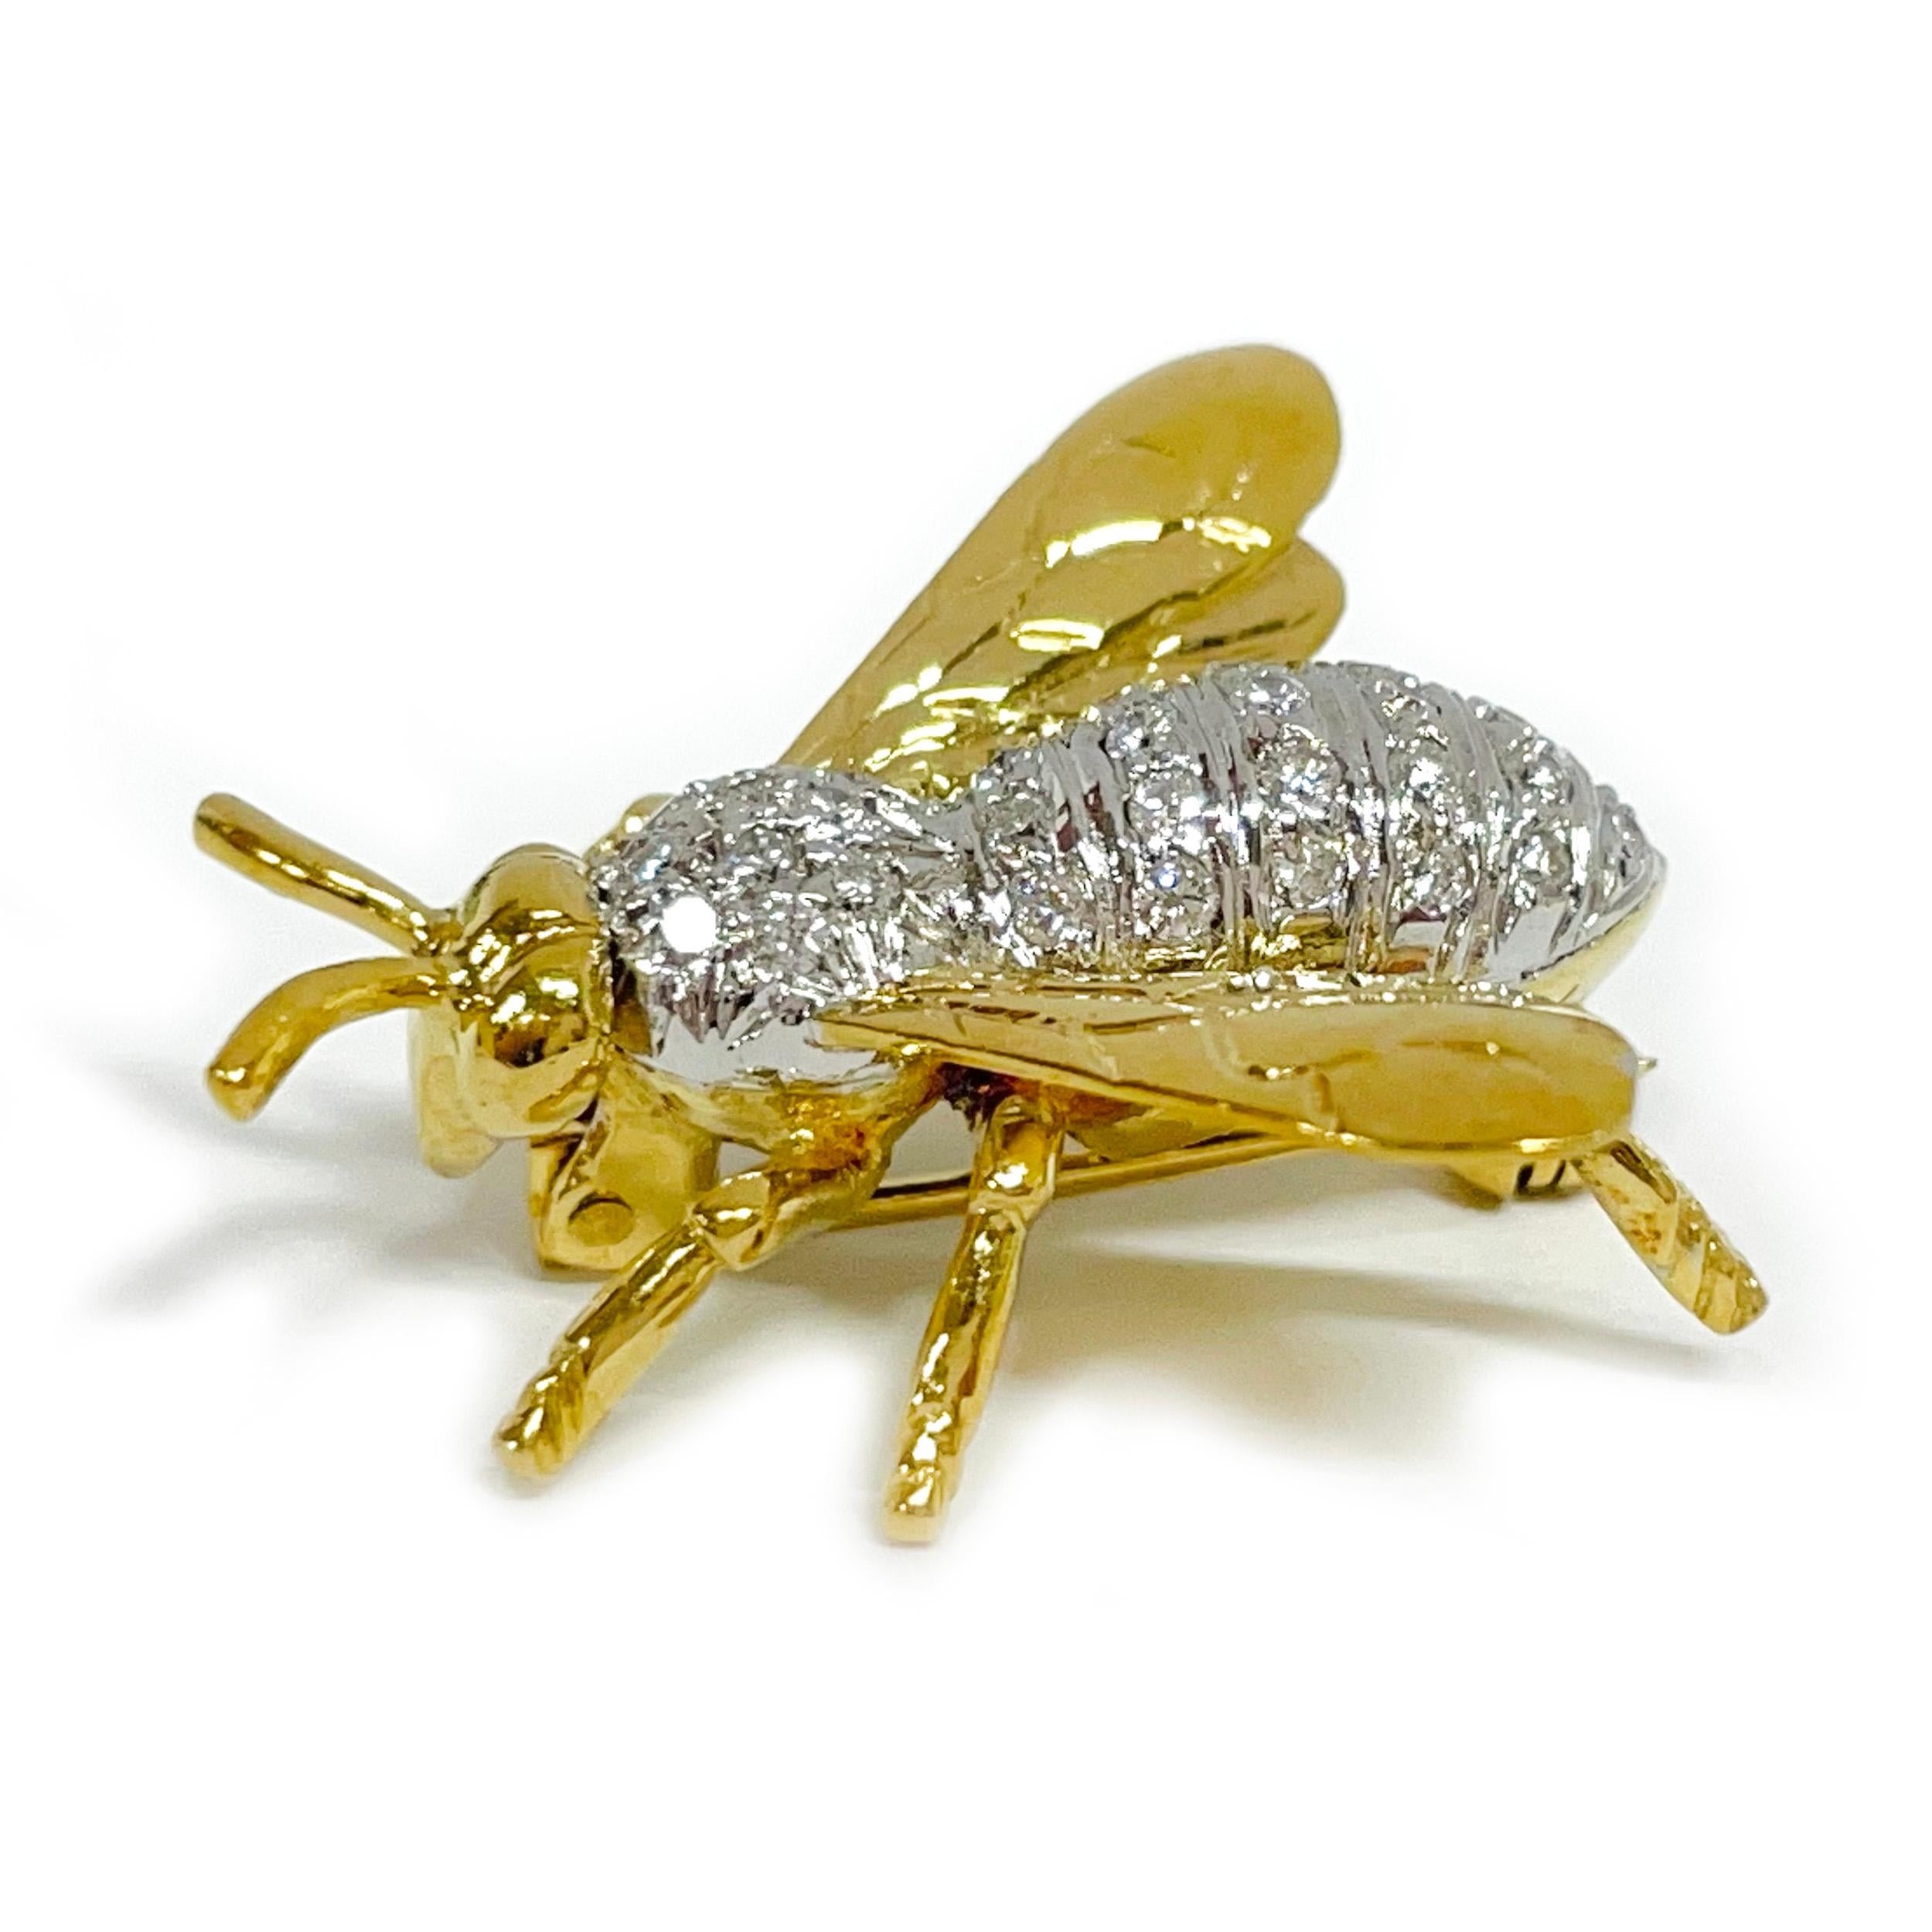 18 Karat Two-Tone Diamond Bee Brooch Pin. Very pretty white and yellow gold with pave-set round diamonds on the body. There are thirty-five 1.6mm round diamonds with a carat total weight 0.50ctw. The diamonds are SI1-SI2 in clarity (G.I.A.) and H-I